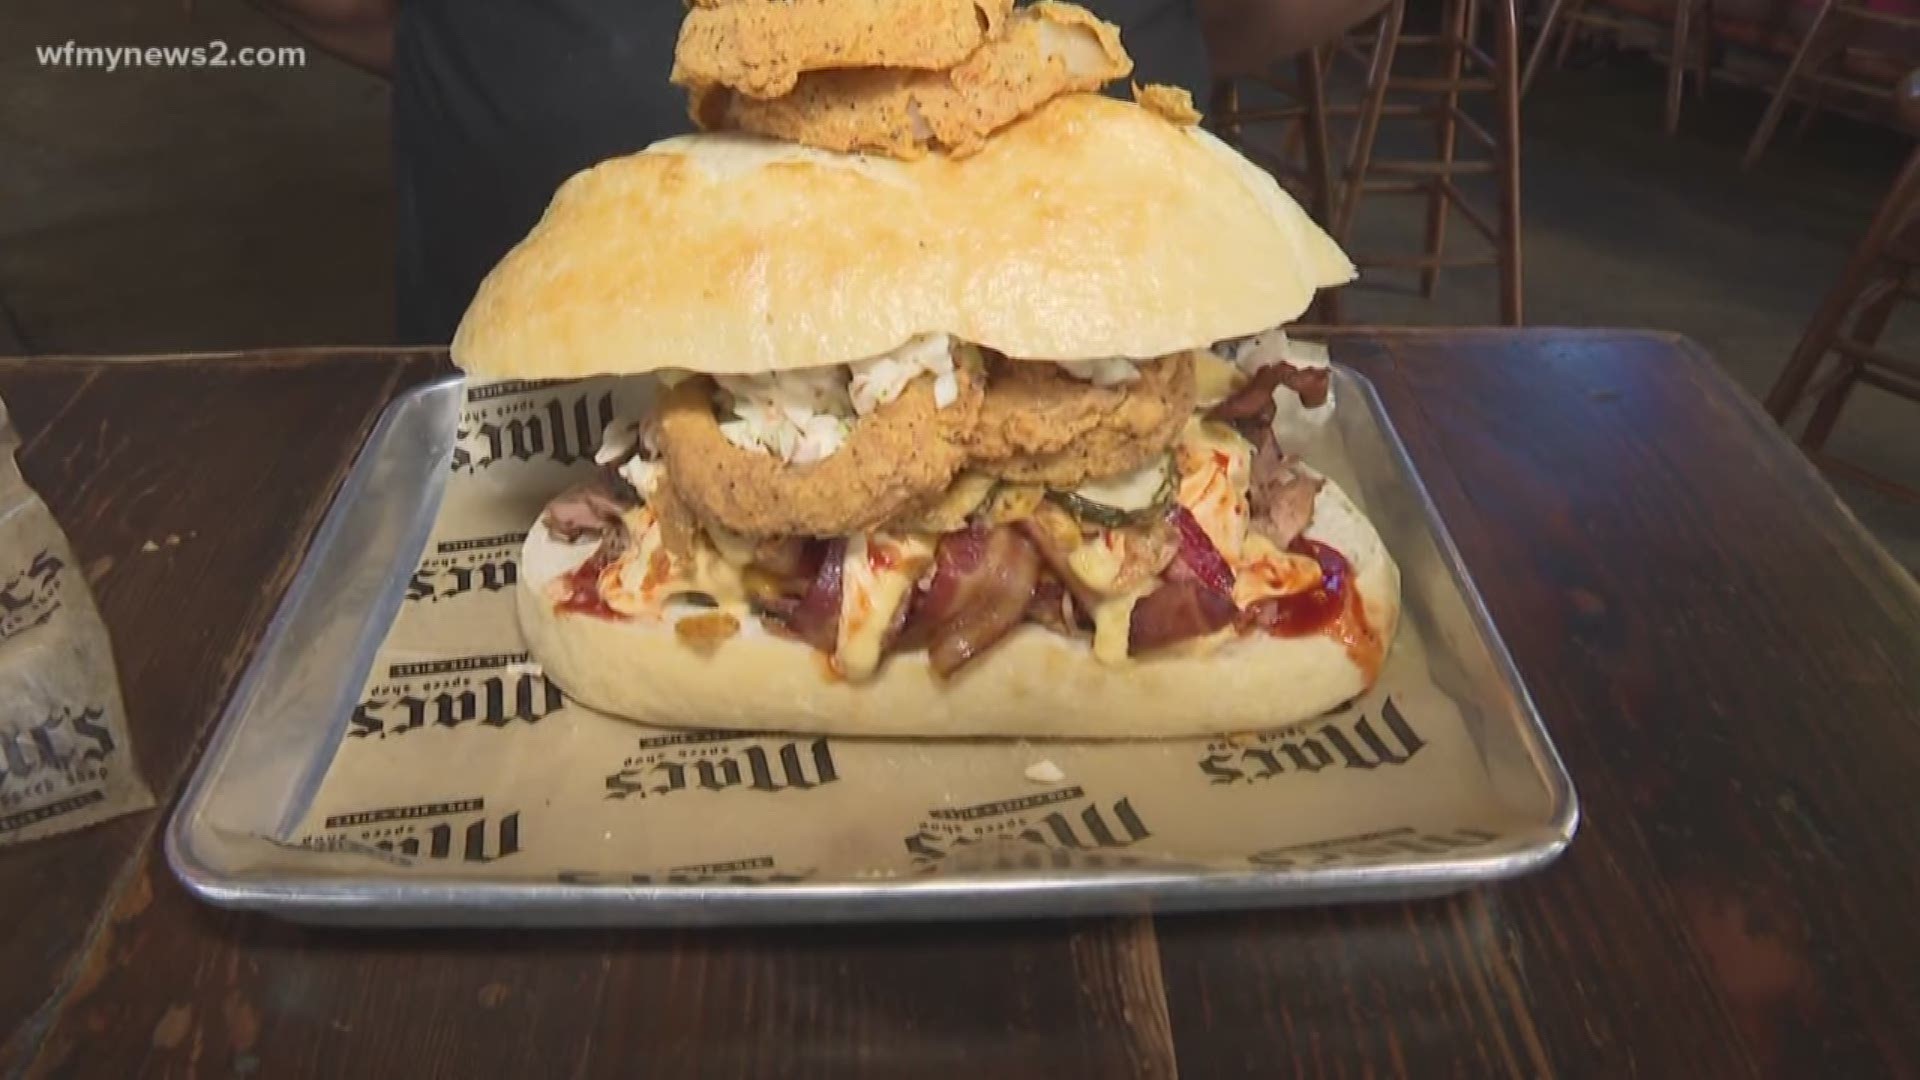 Mac’s Speed Shop shows off a sandwich challenge that only several customers have successfully finished.